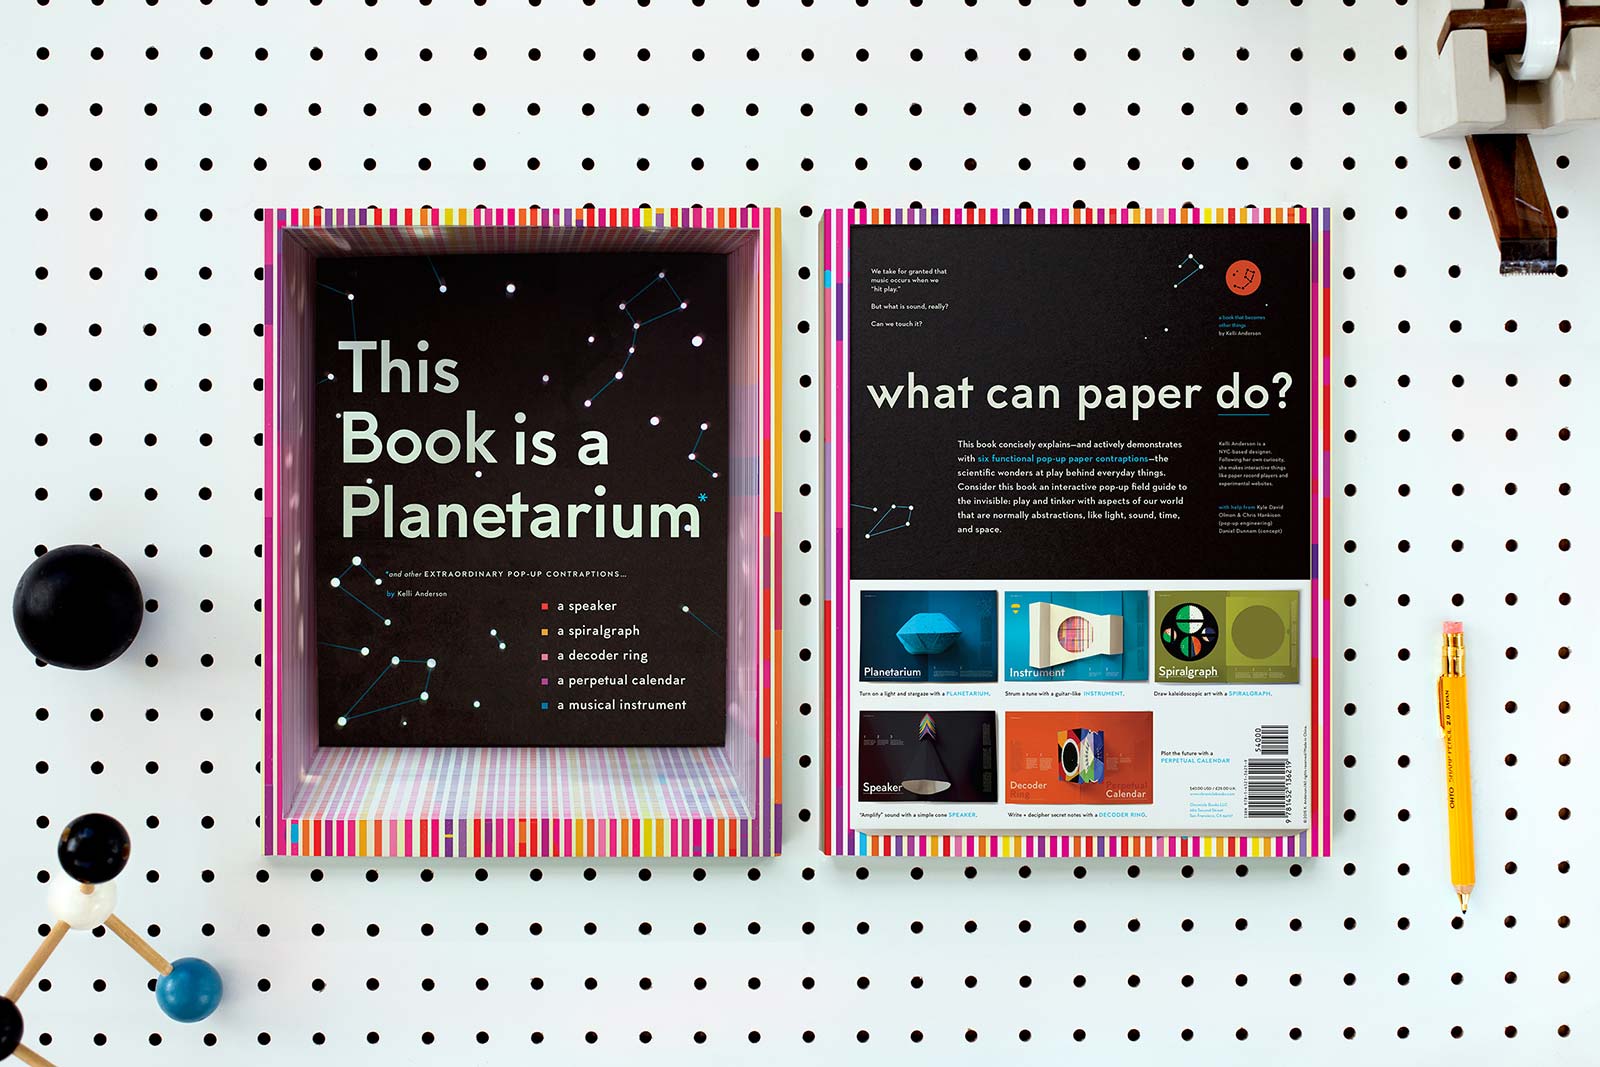 This Book is a Planetarium by Kelli Anderson